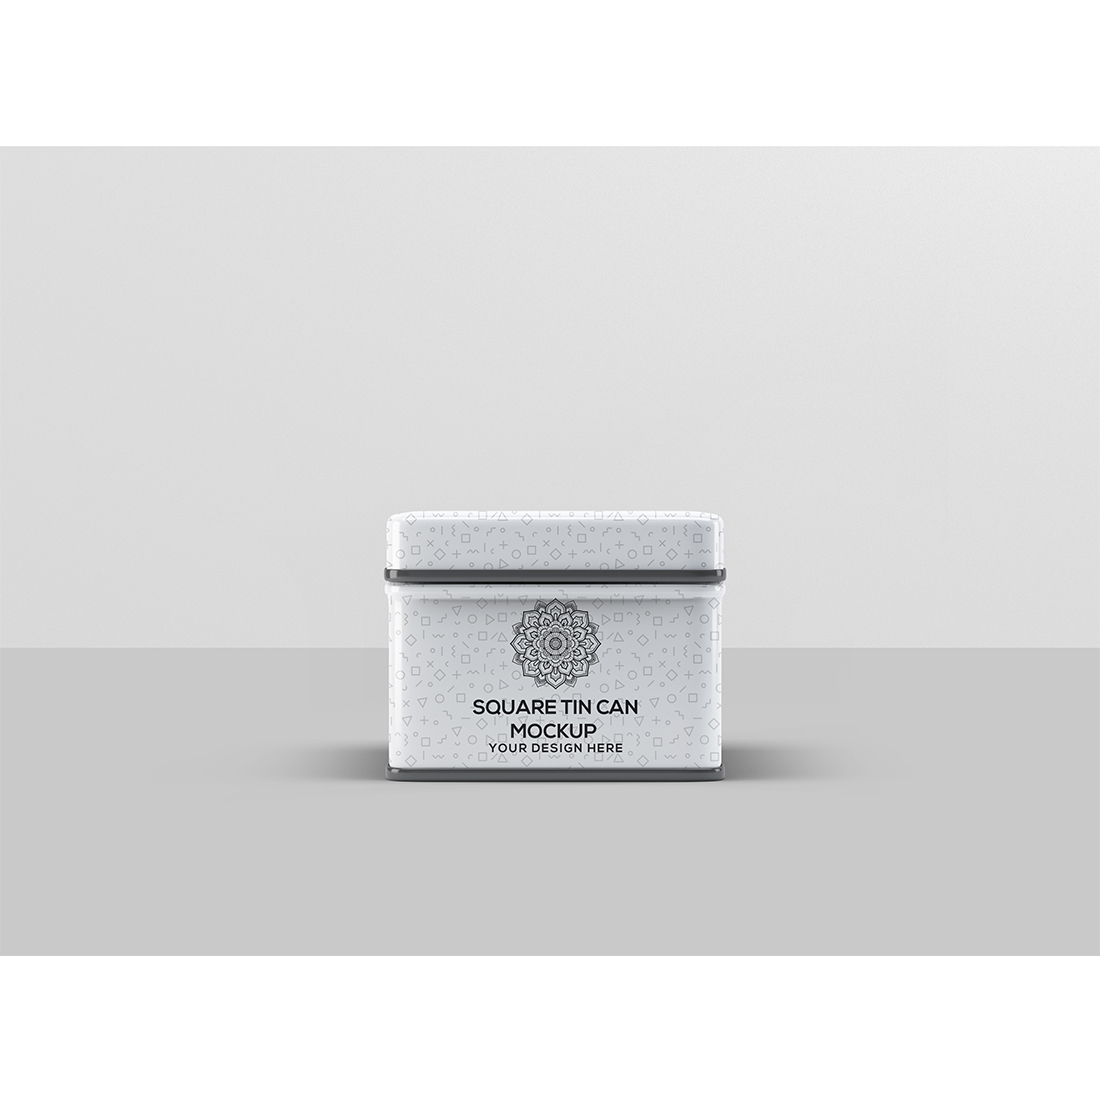 Small Square Tin Can Mockup cover image.